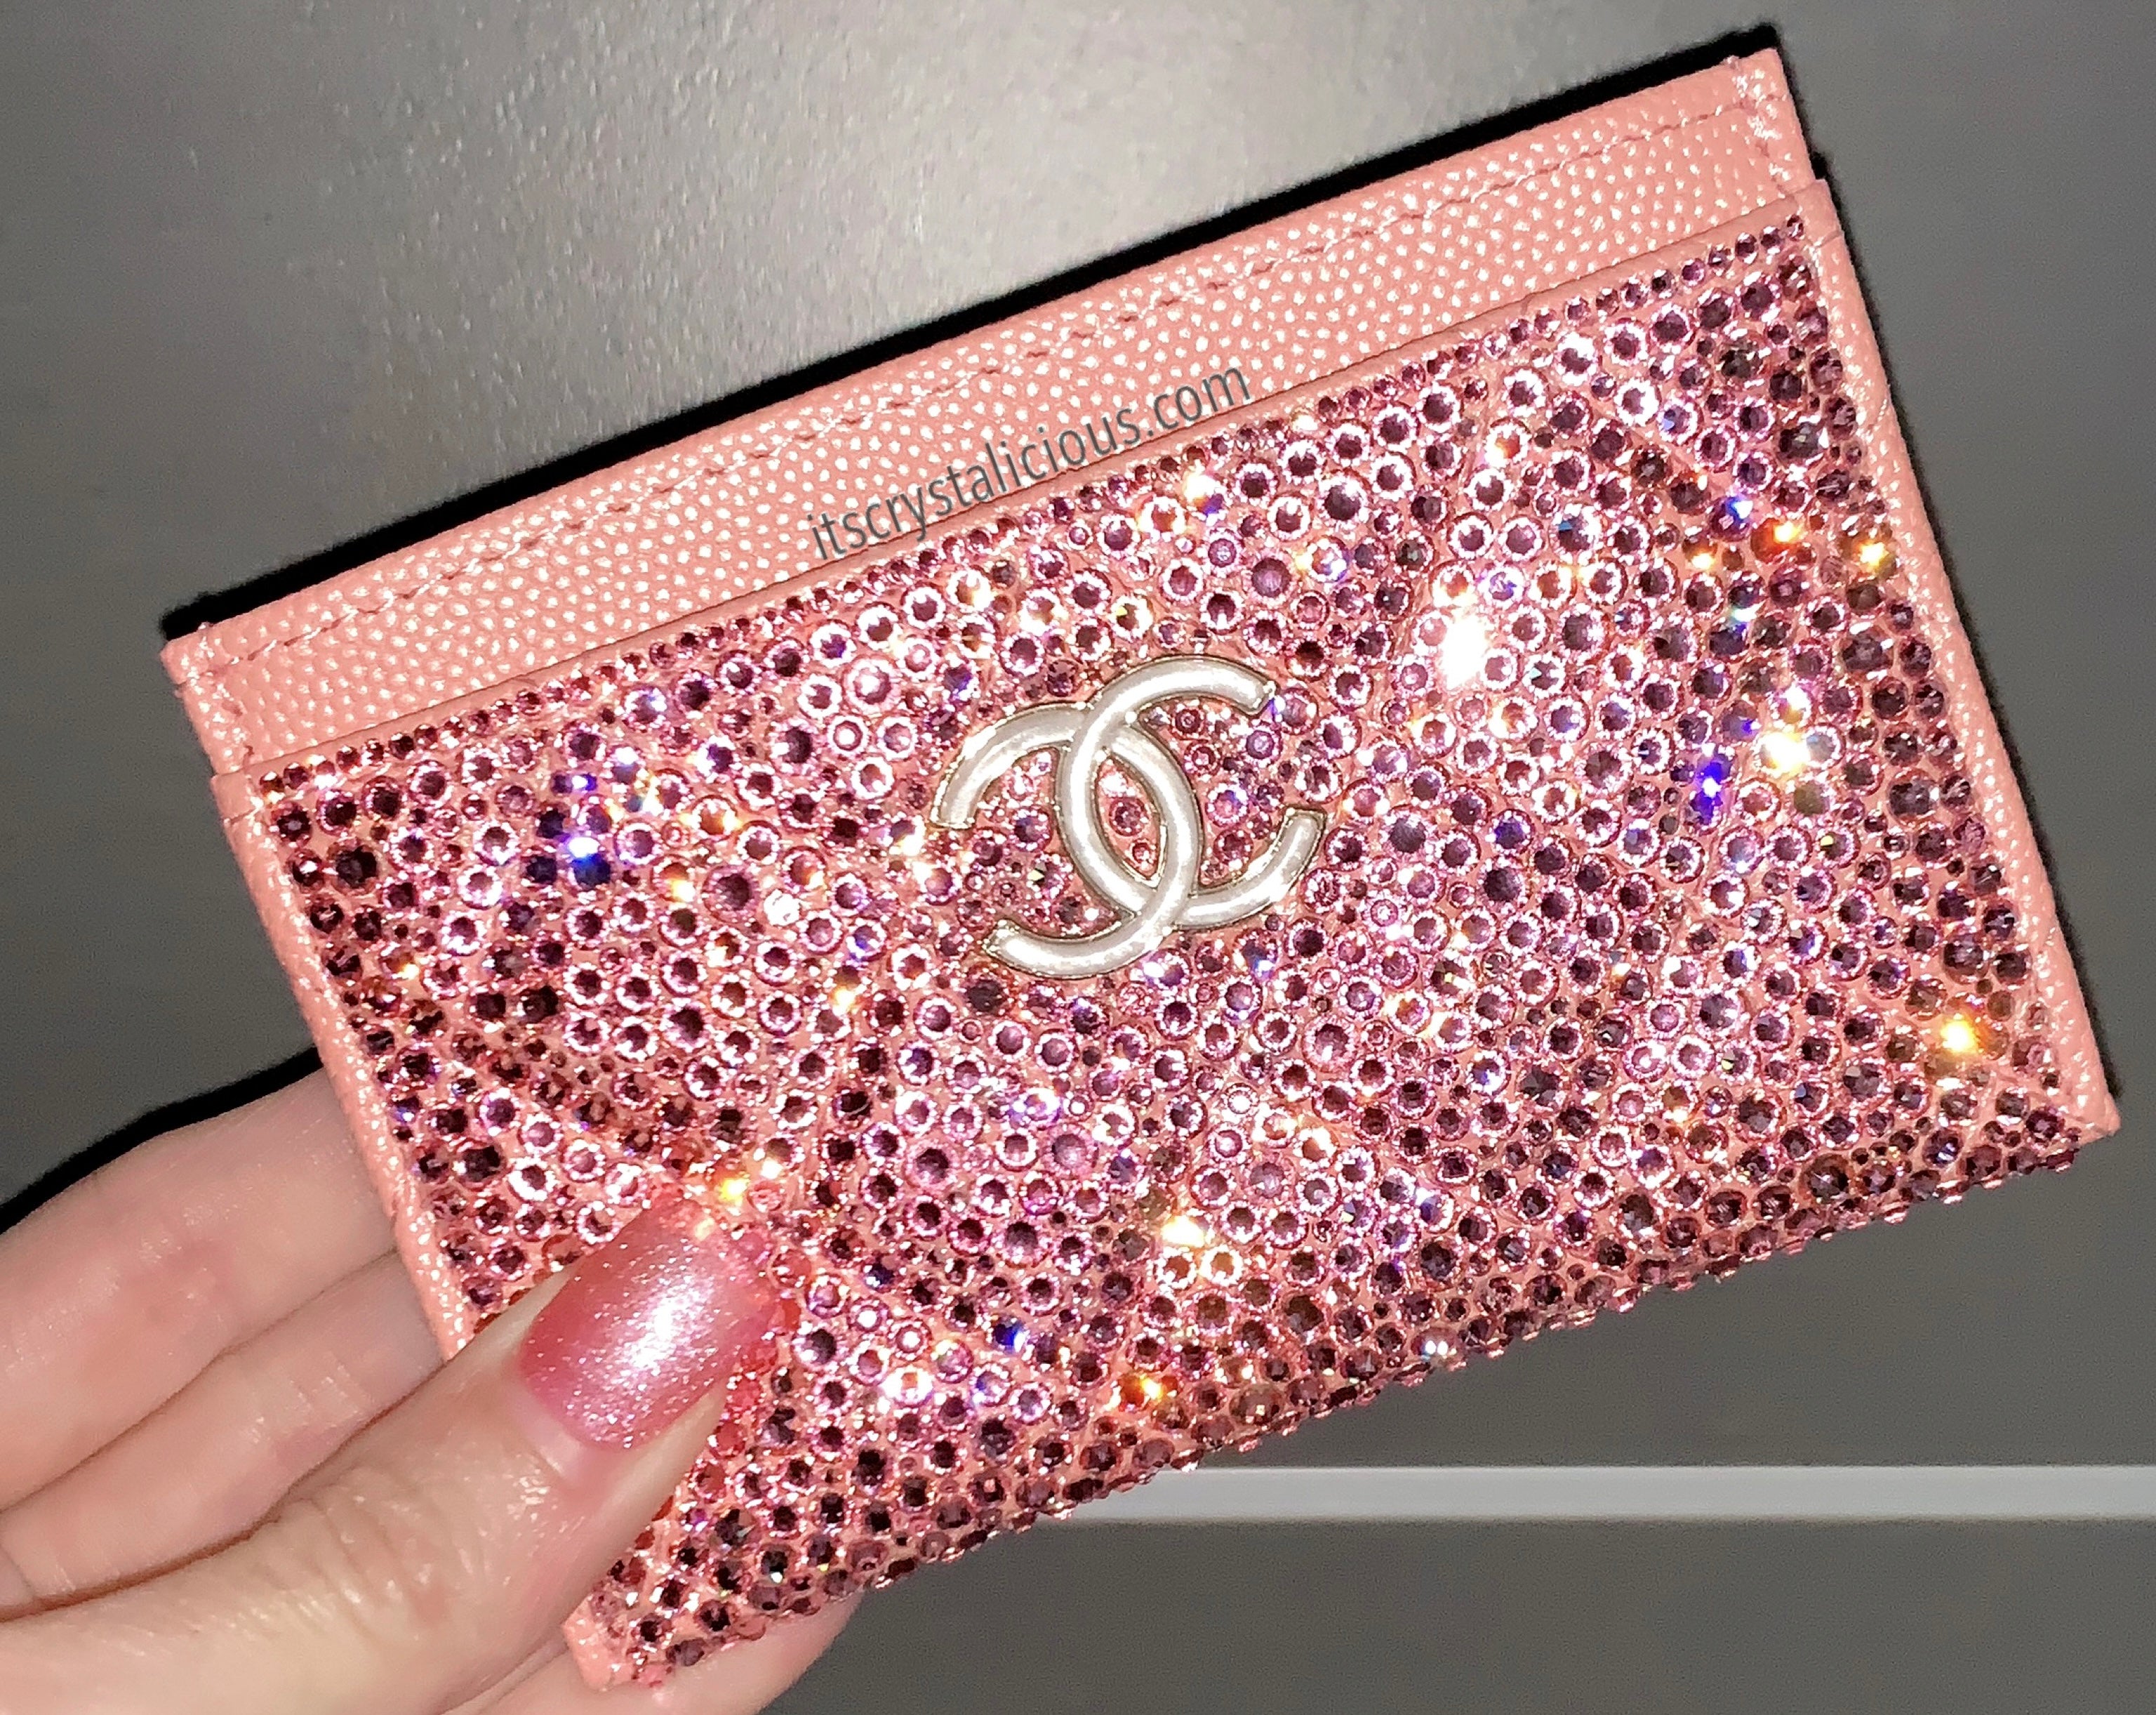 Chanel 2022 ID Card Holder - Pink Wallets, Accessories - CHA810459